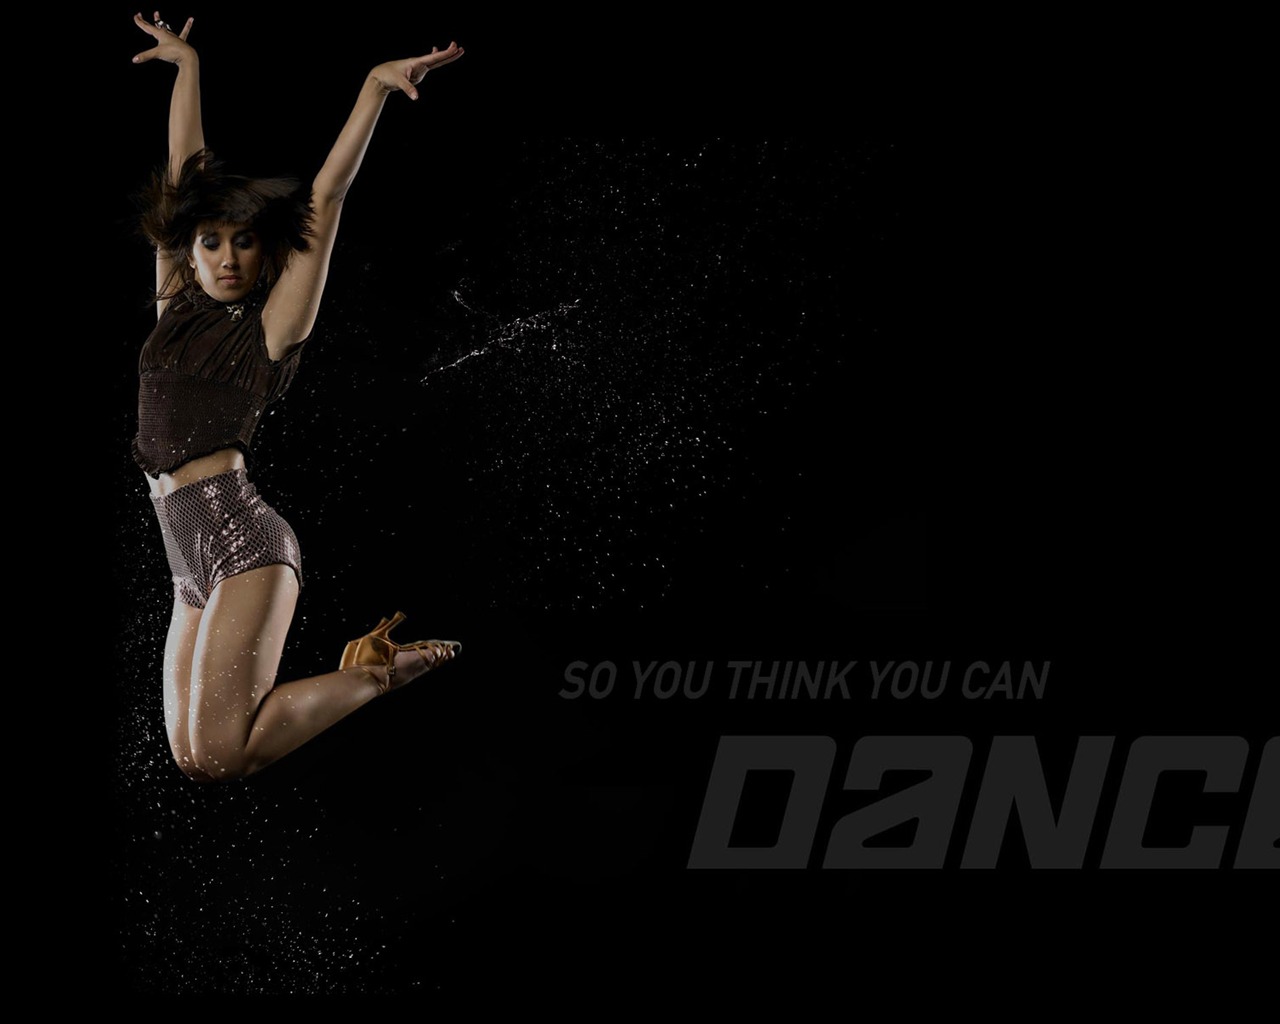 So You Think You Can Dance wallpaper (1) #11 - 1280x1024